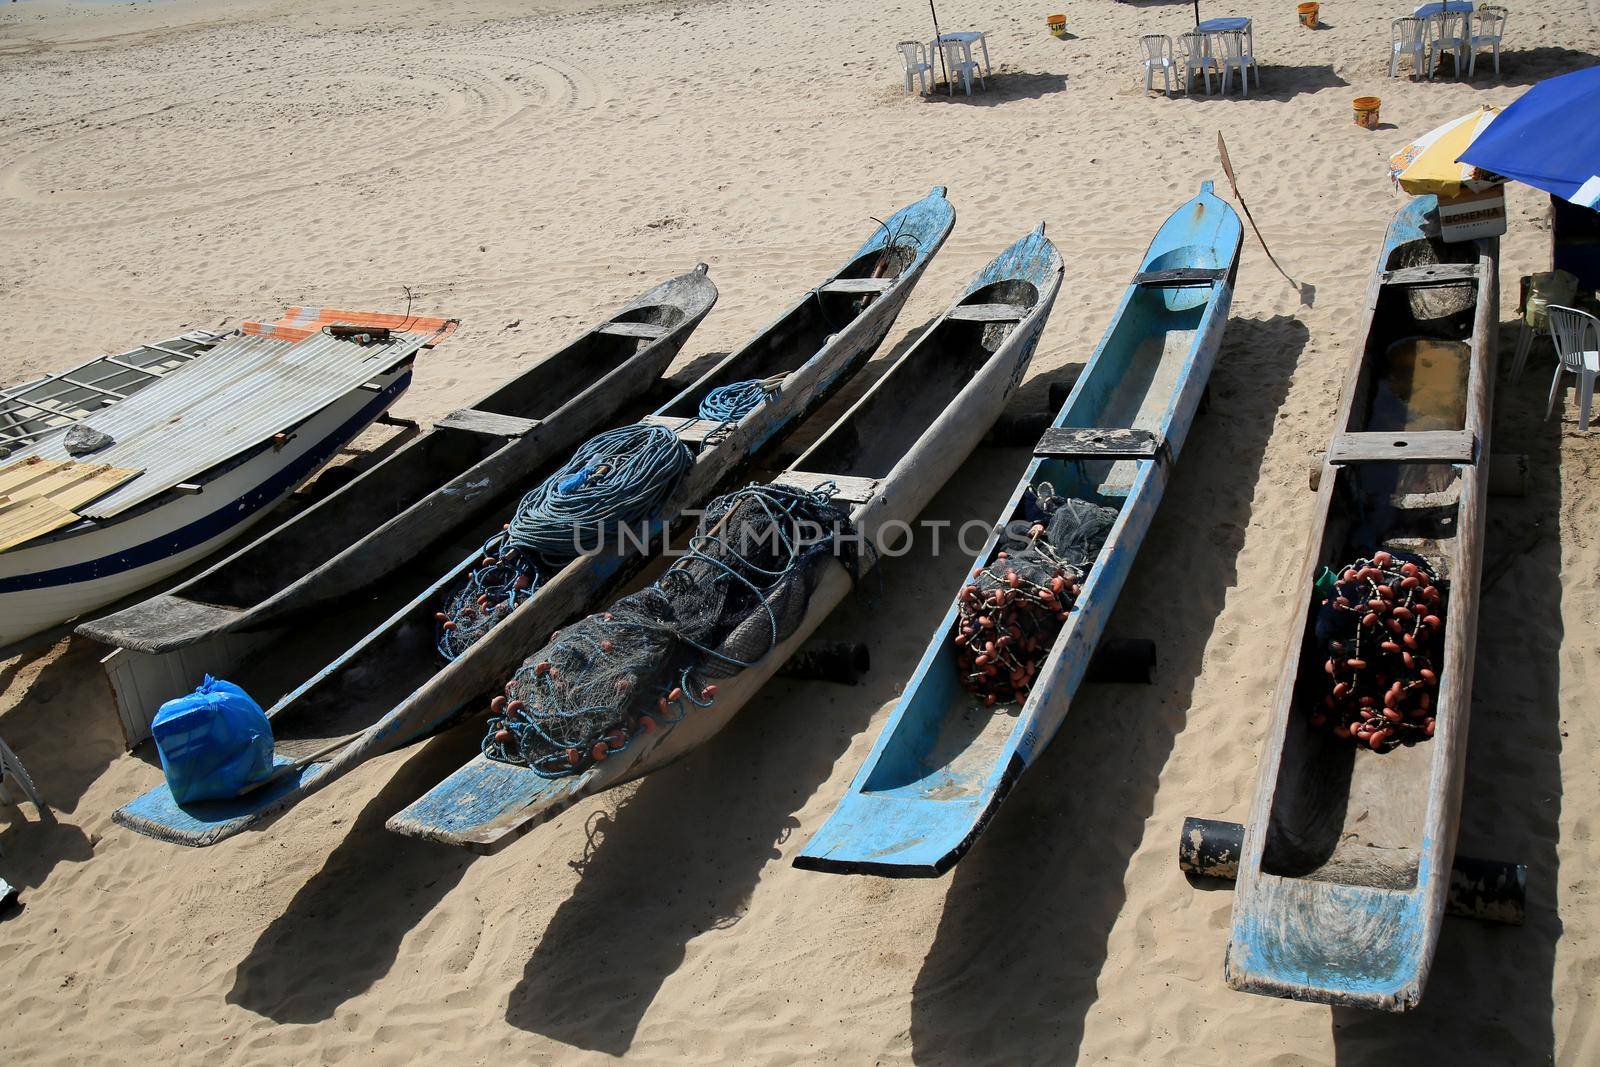 salvador, bahia, brazil - december 21, 2020: canoes used by fishermen in artisanal fishing on Itapua beach, in the city of Salvador.